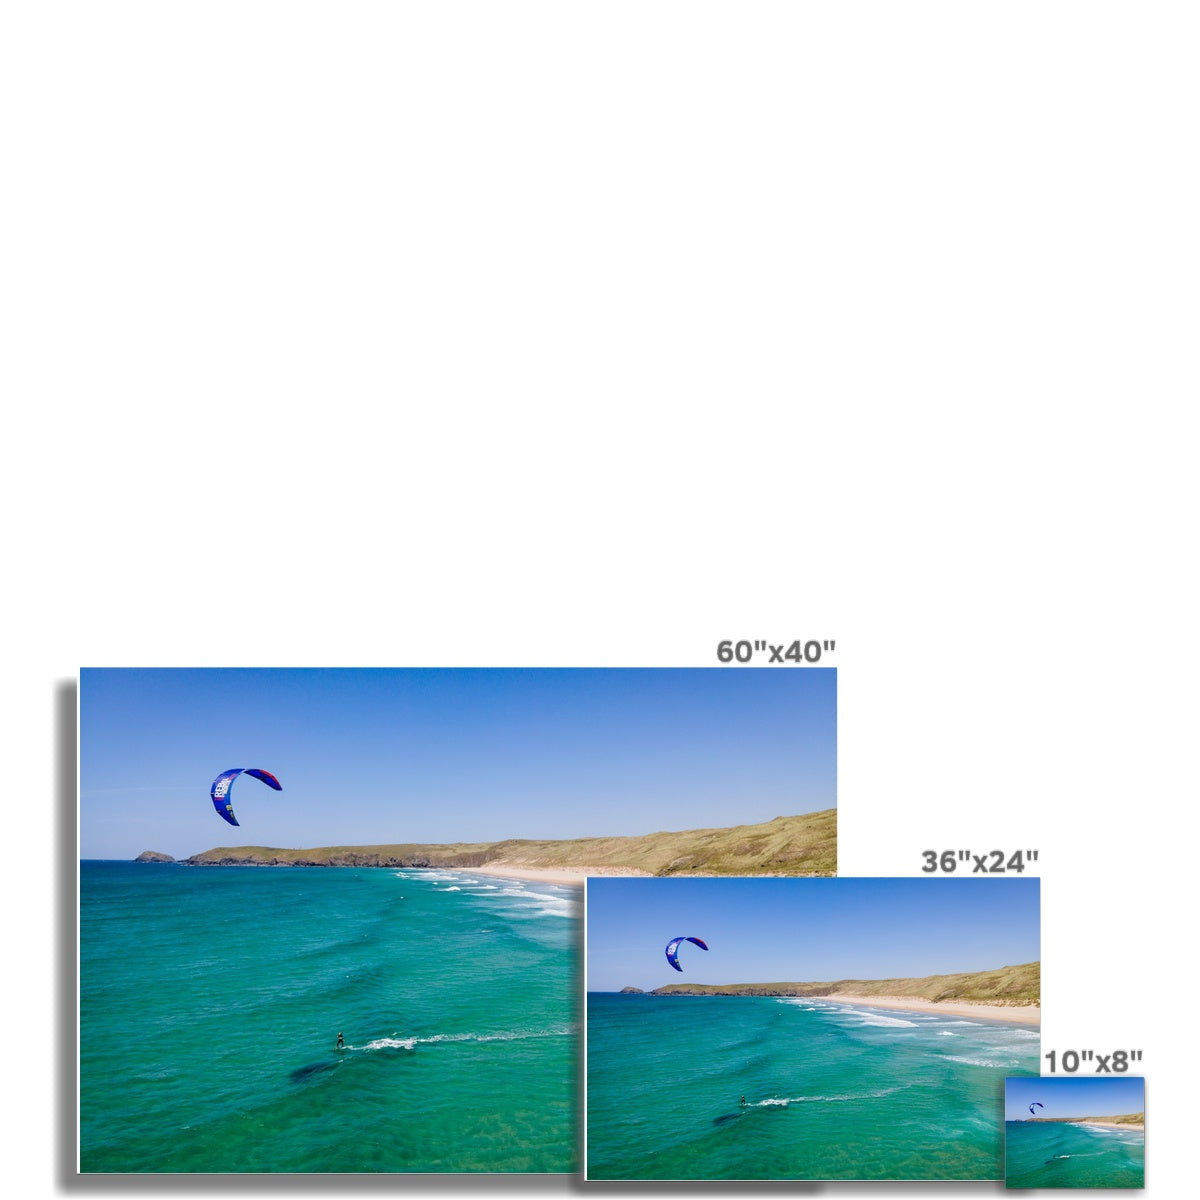 kitesurfing perran sands photograph picture sizes